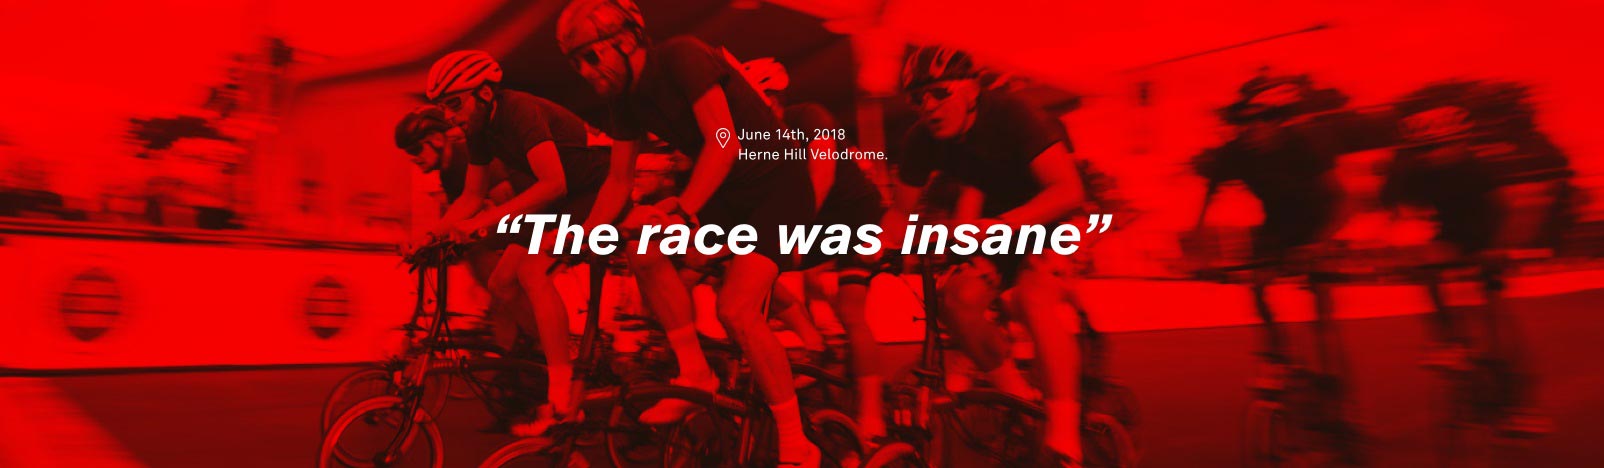 A red edited photograph of the Herne Hill Velodrome on 14 June 2018 with graphic text "The race was insane"